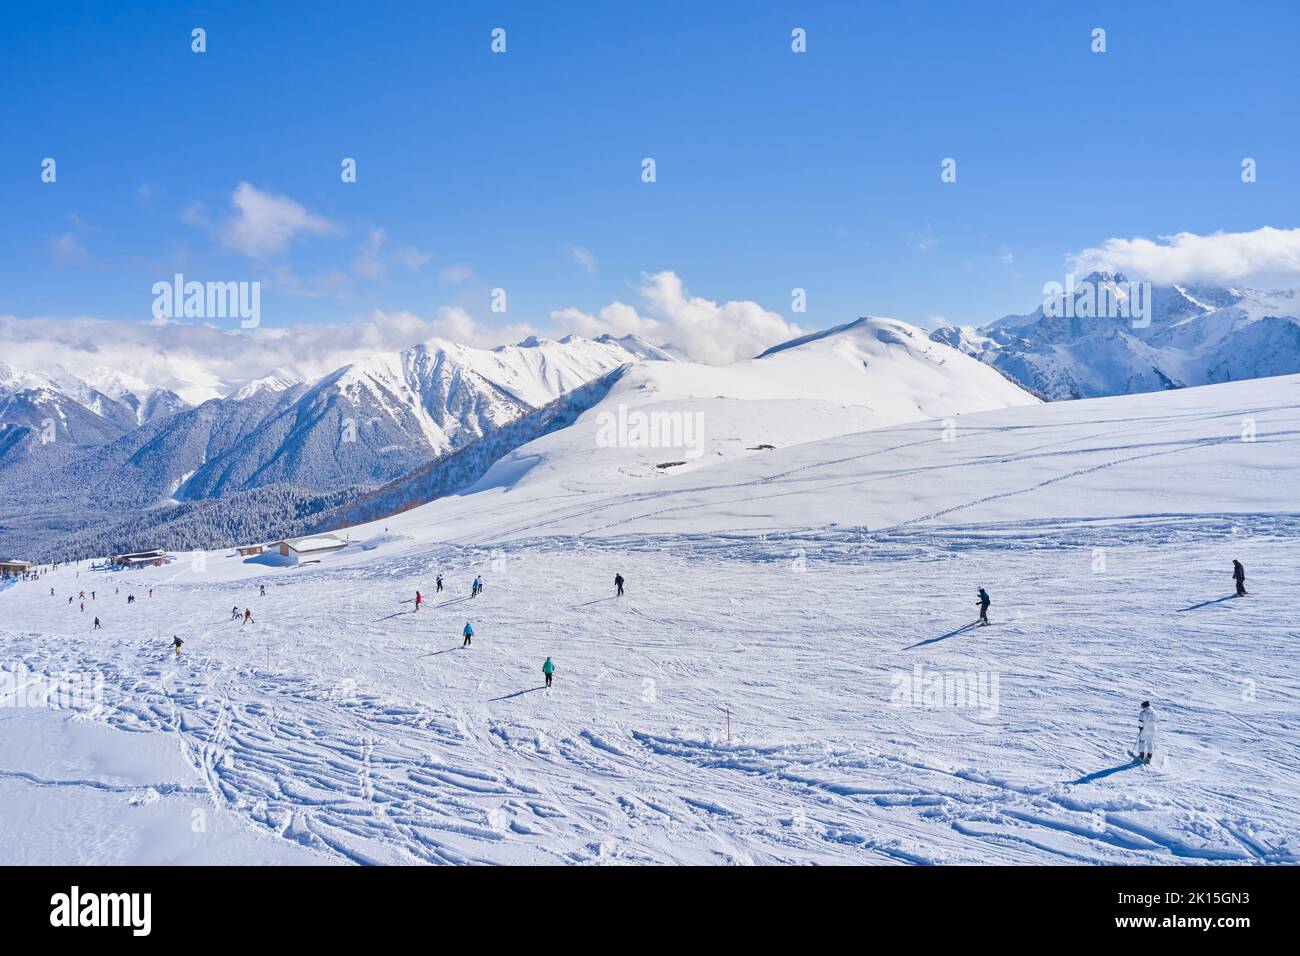 People on the ski slope on a sunny day. Stock Photo